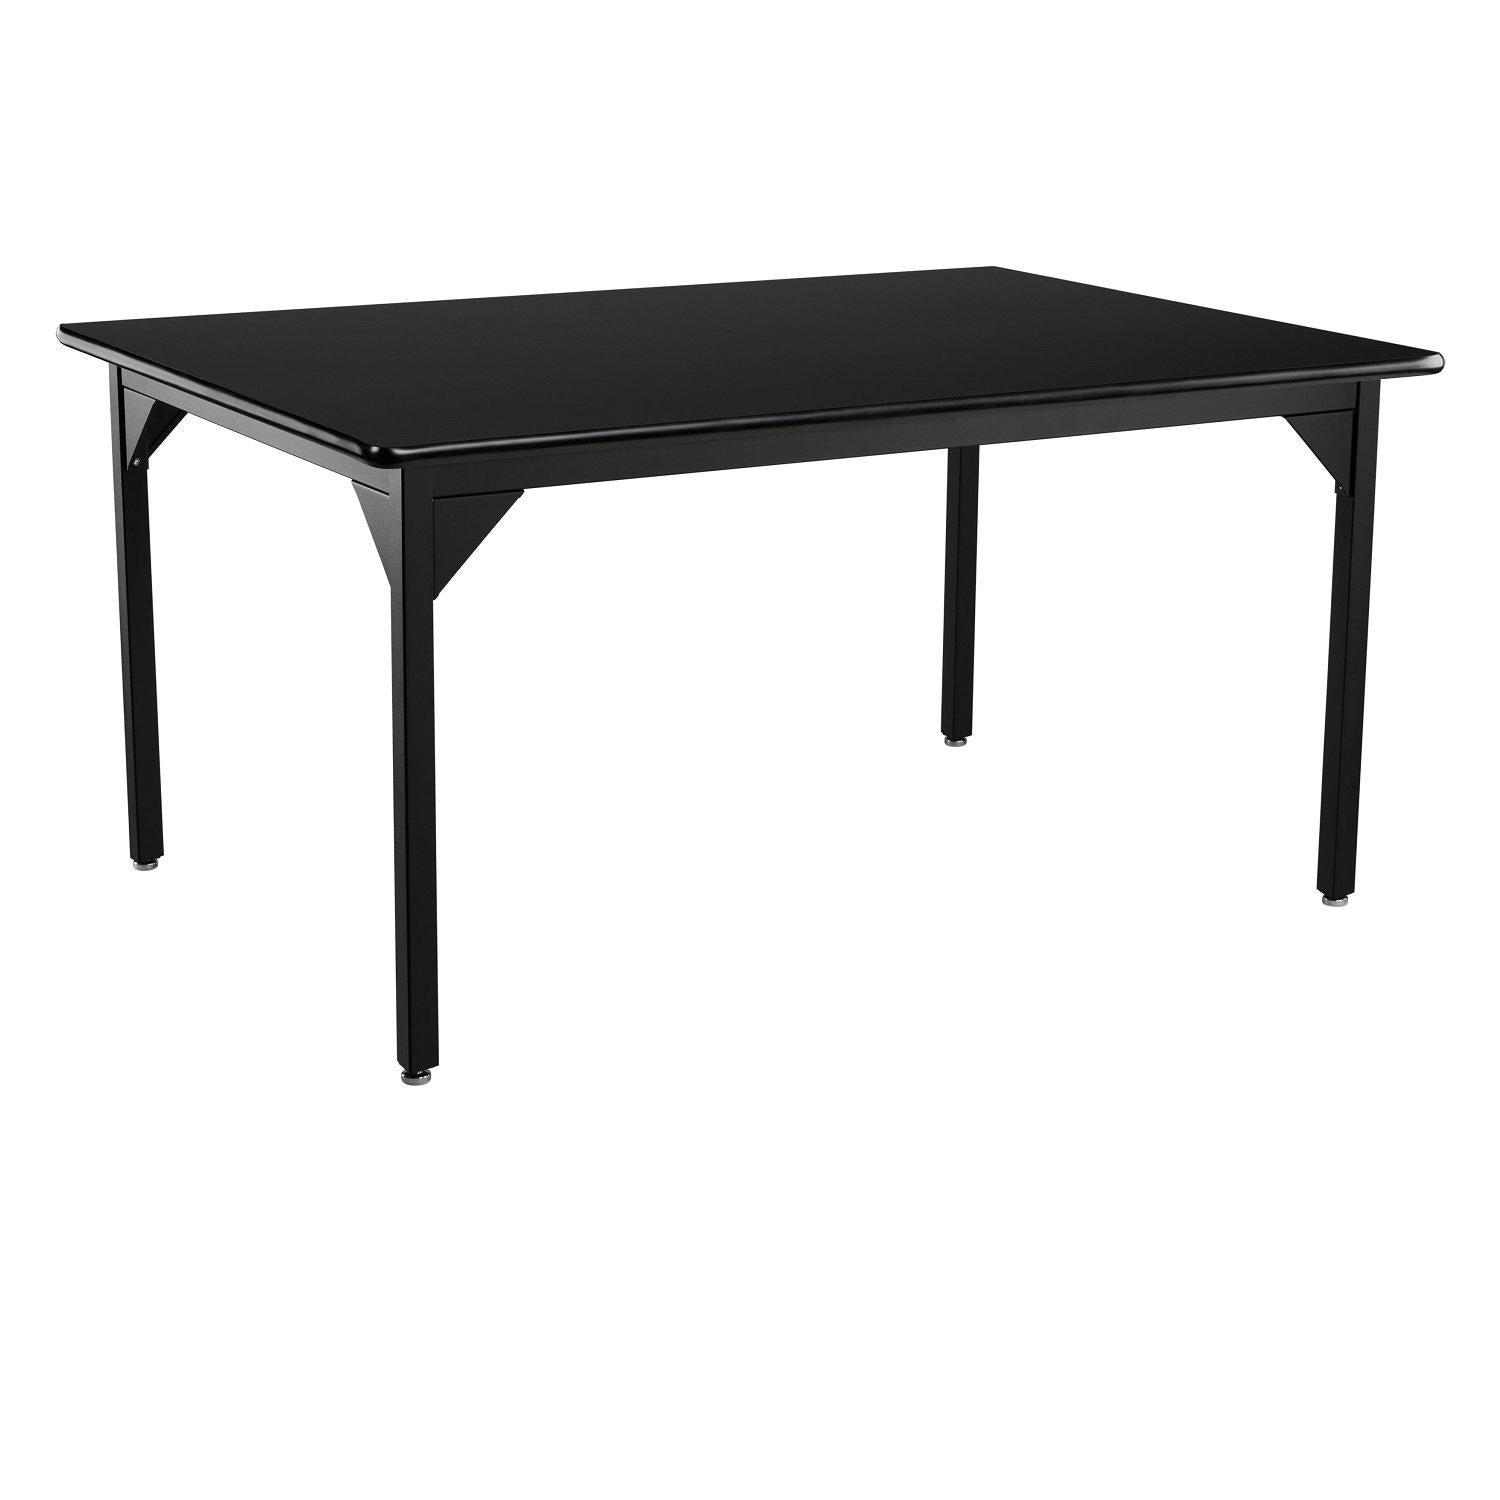 Heavy-Duty Fixed Height Utility Table, Black Frame, 48" x 48", High-Pressure Laminate Top with T-Mold Edge